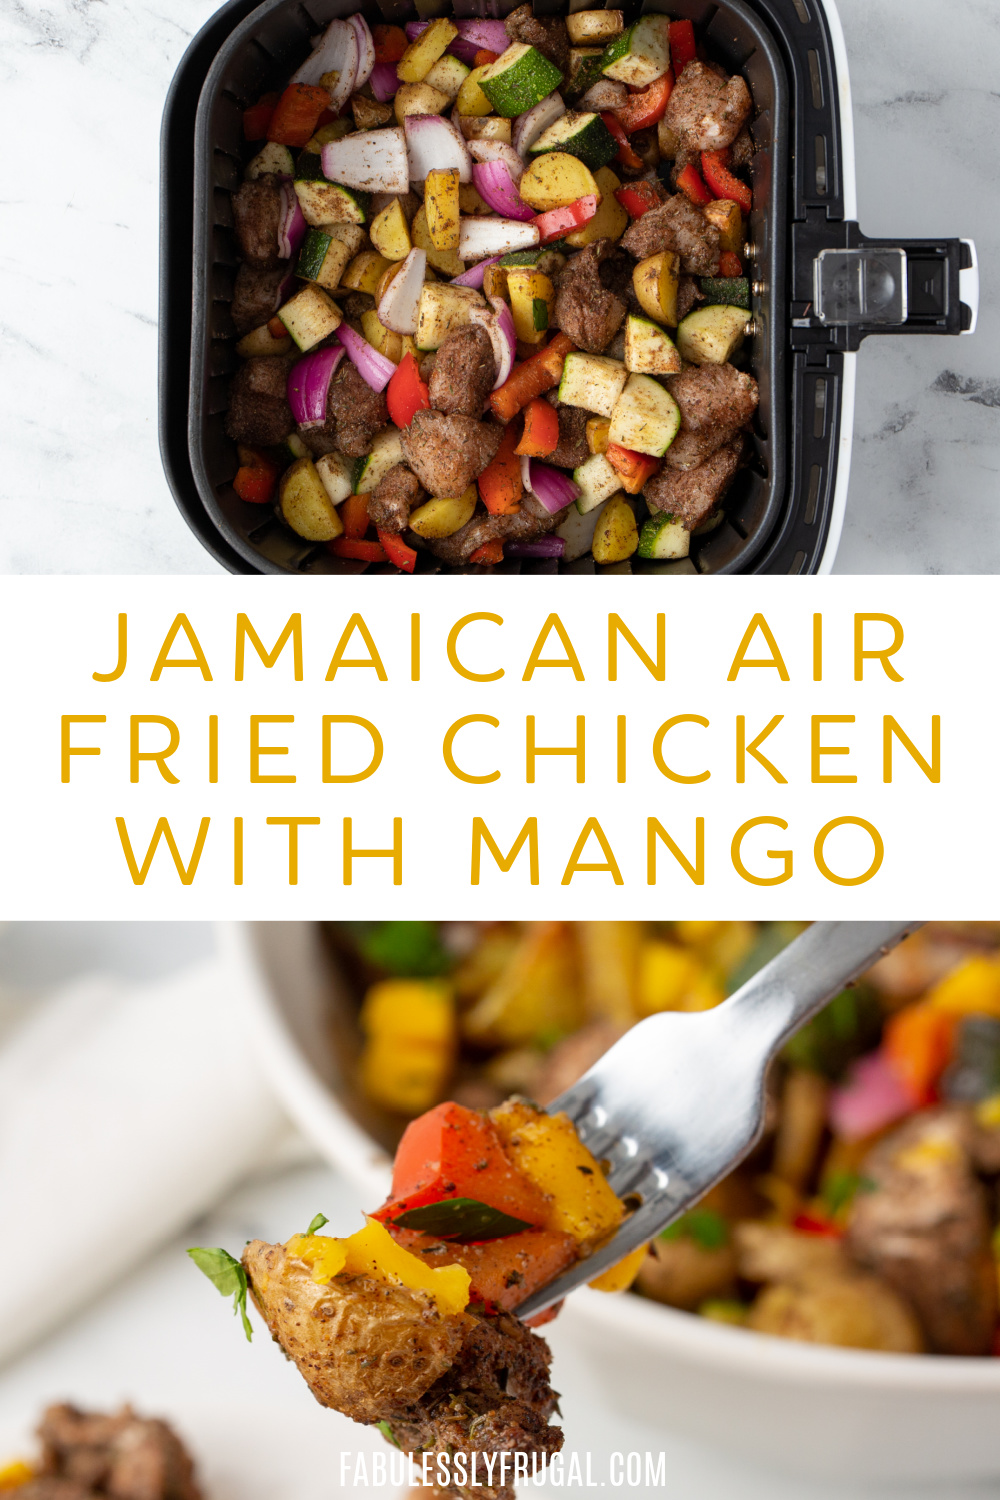 jamaican air fried chicken with mango